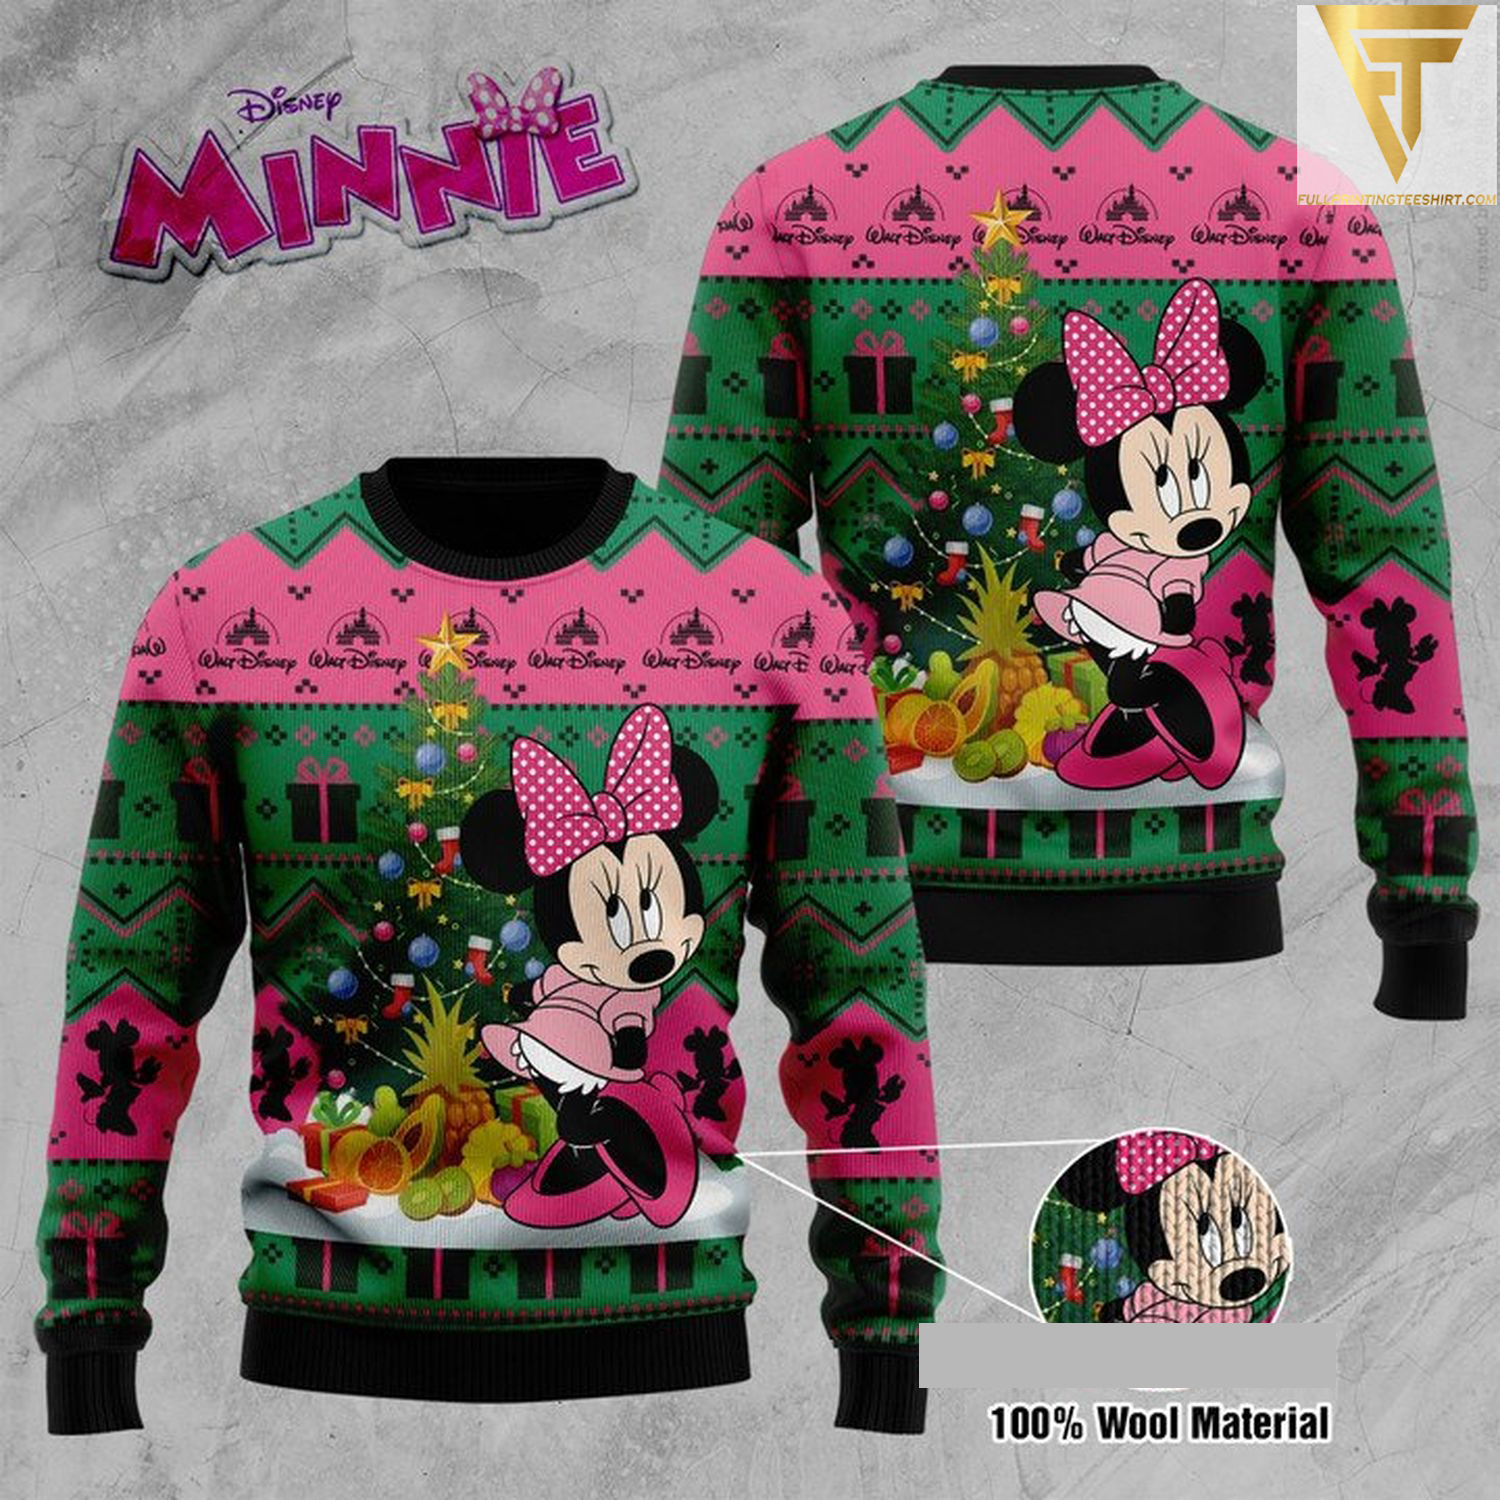 Minnie mouse ugly christmas sweater - Copy (2)